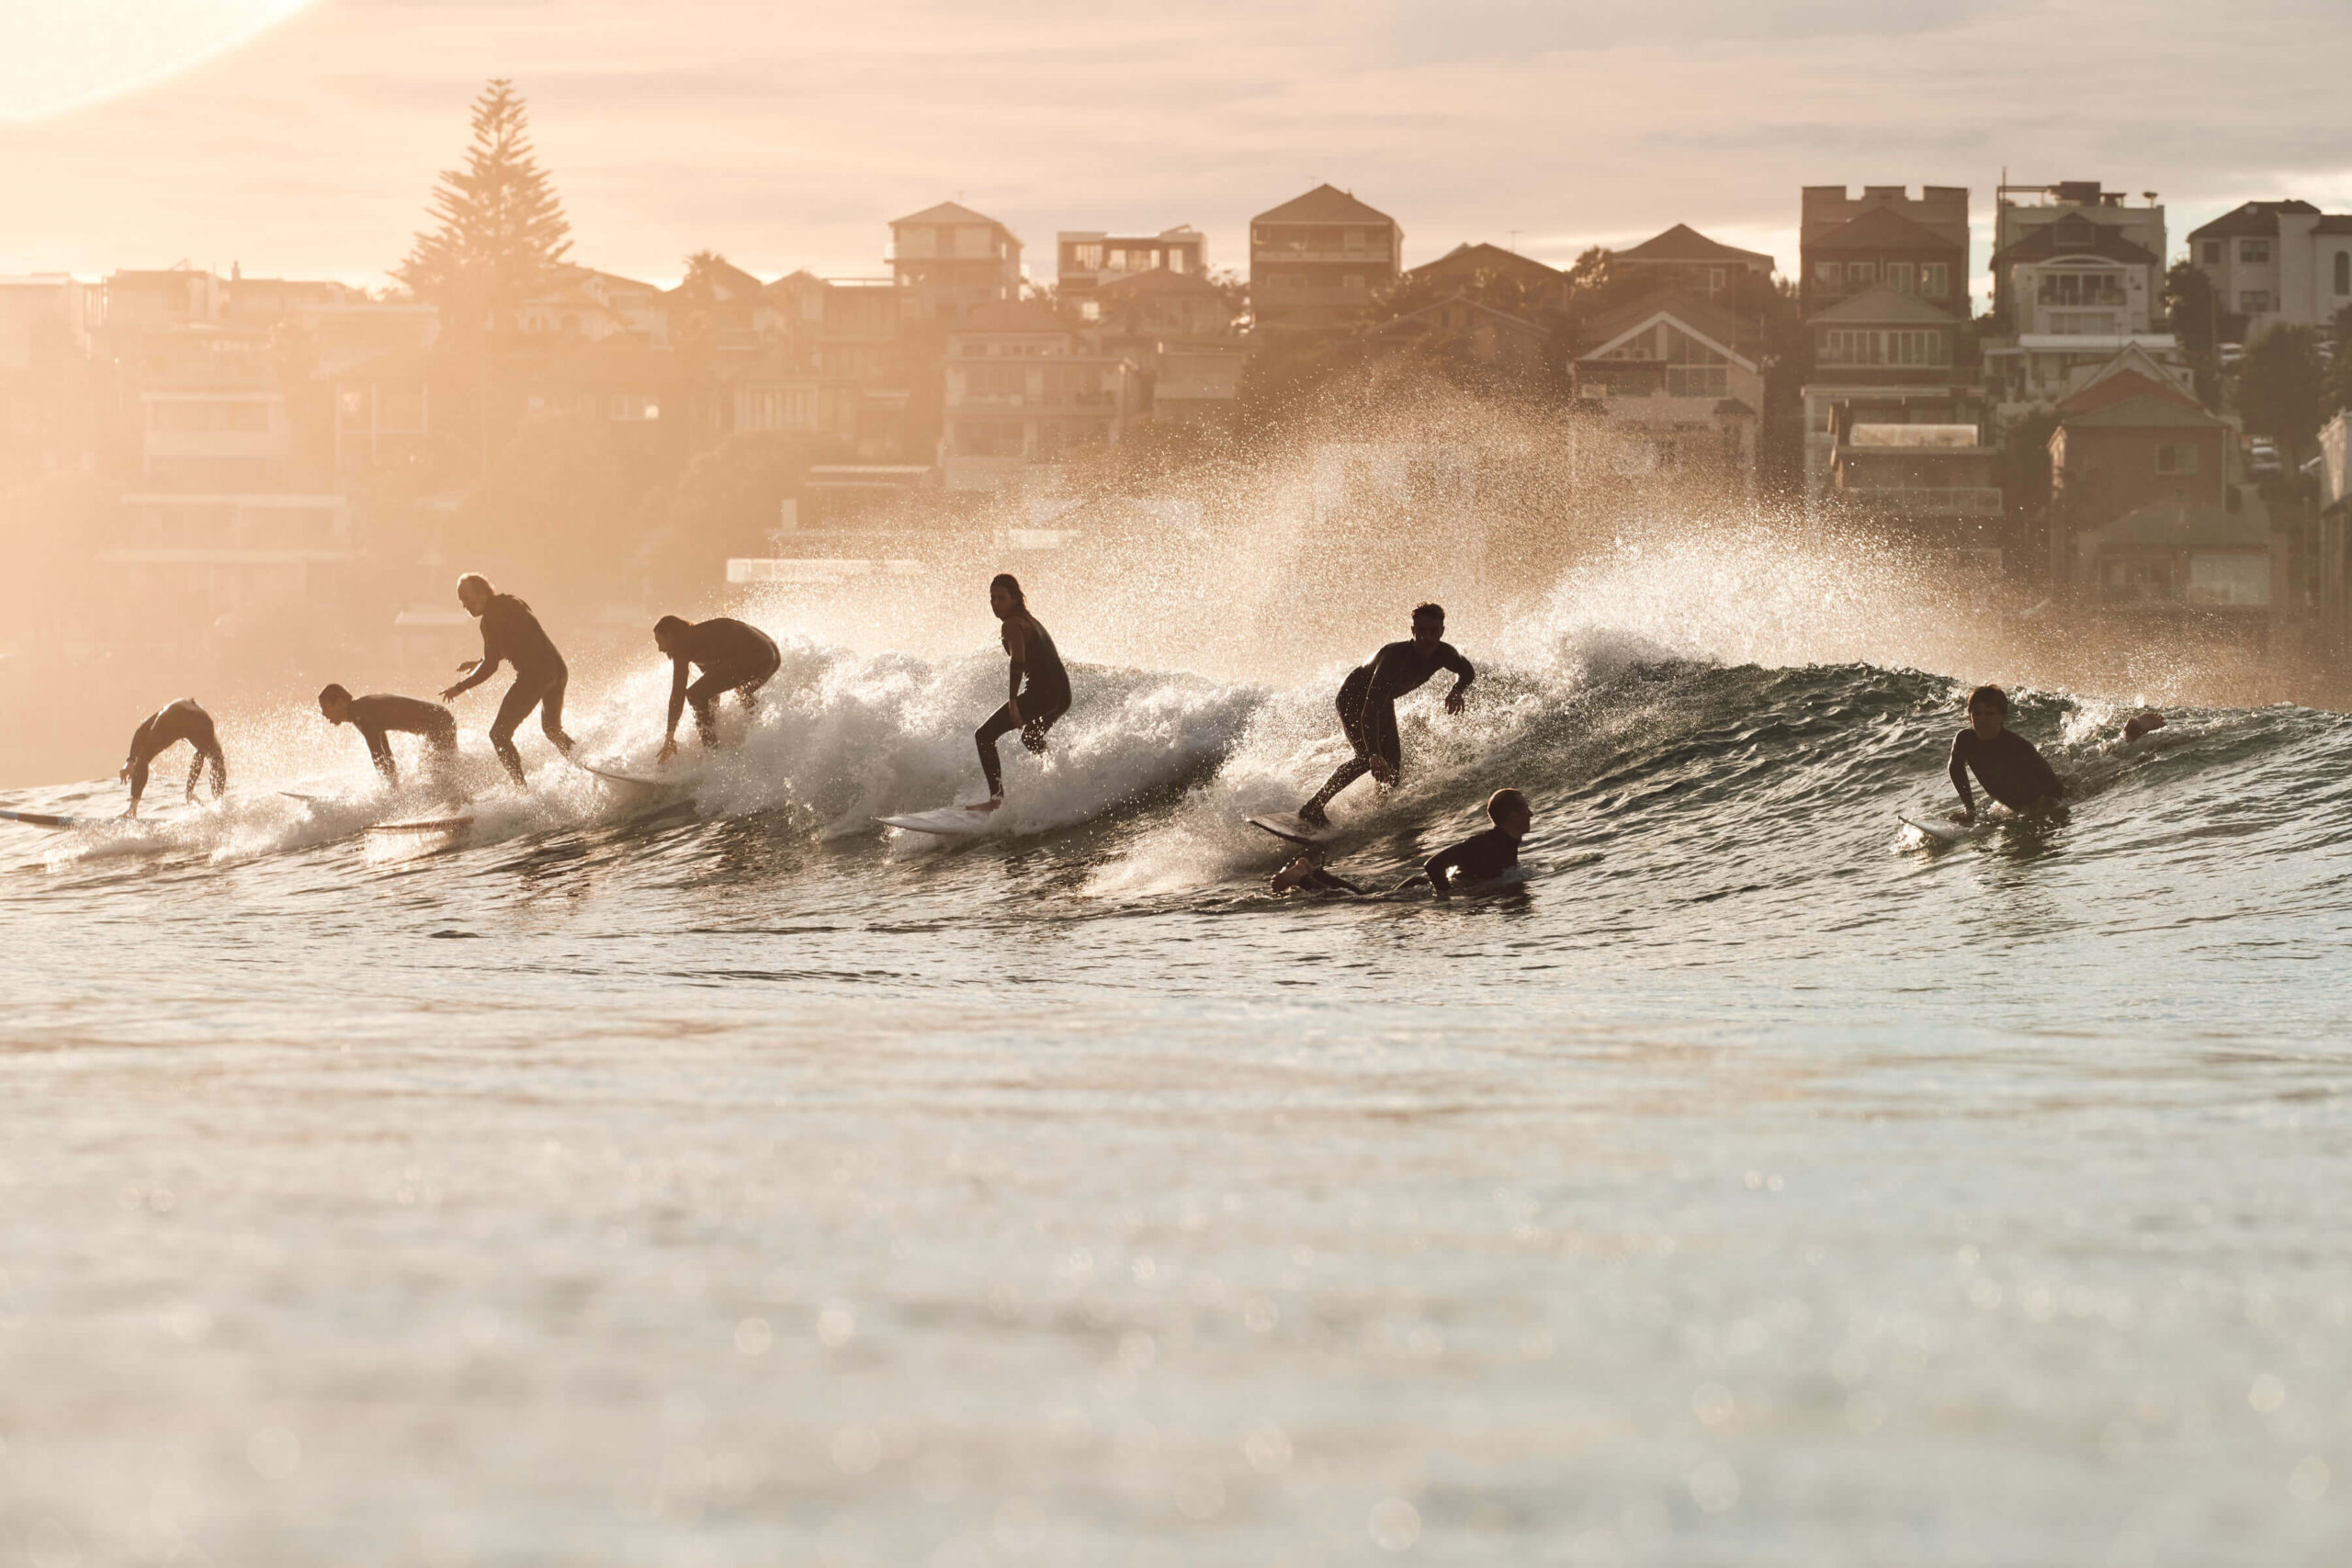 Surfers riding wave with city in background